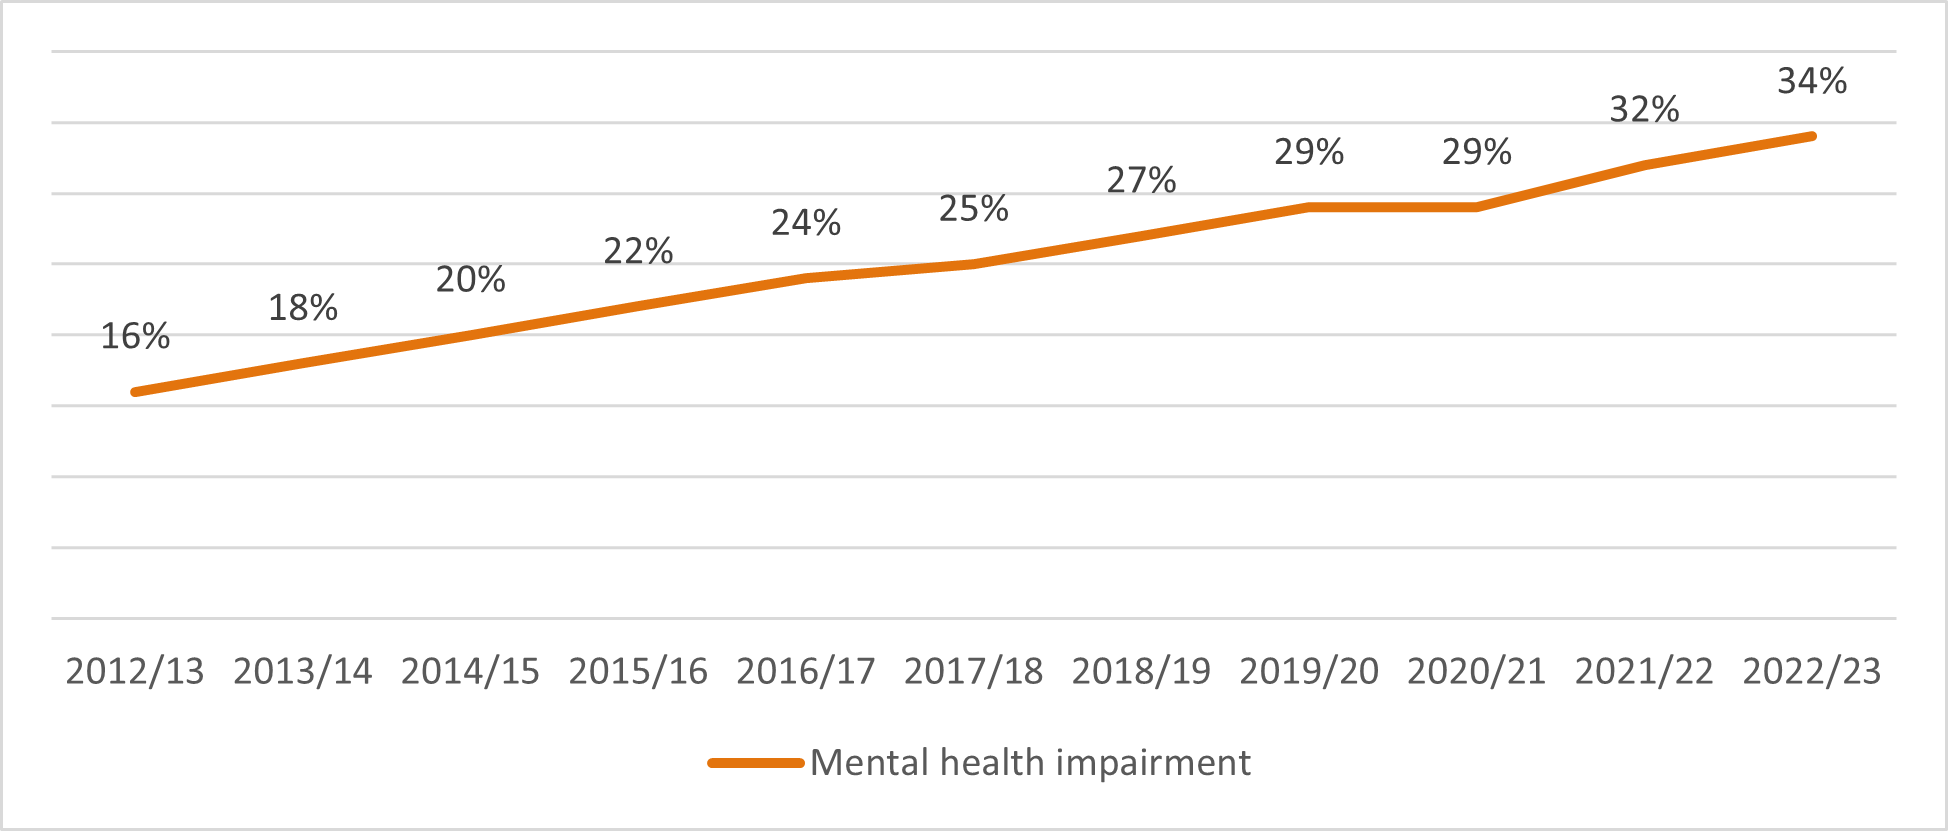 A graph showing the increase in Mental health impairments over ten years from 15% in 2012 to 2013, to 34% in 2022 to 2023.